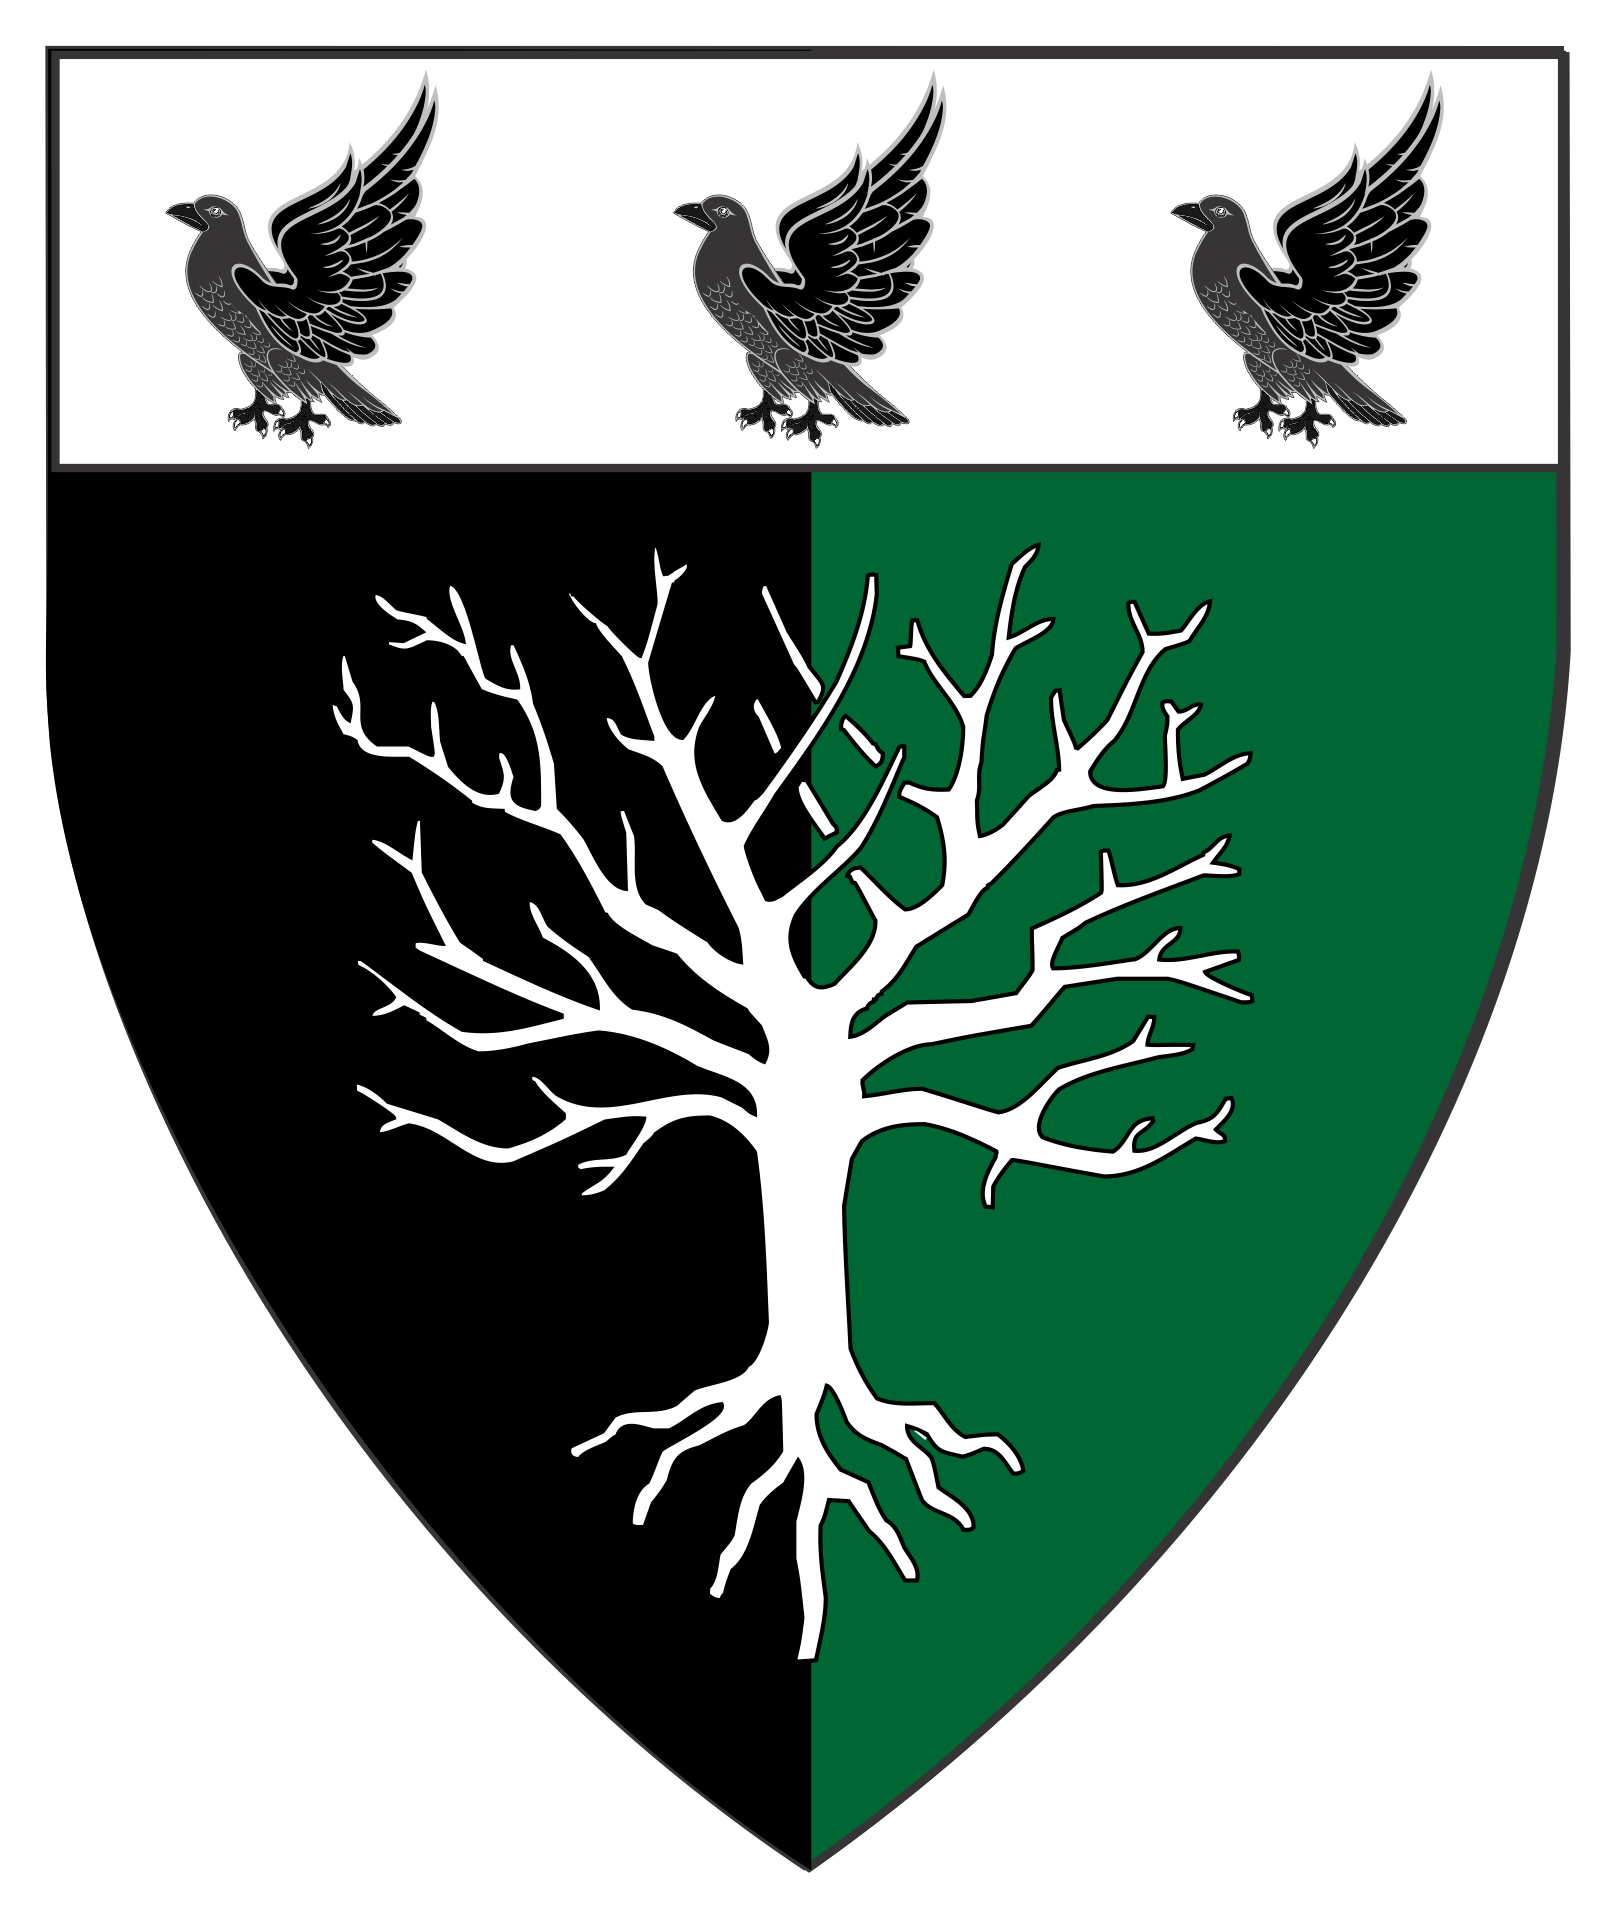 Per pale sable and vert, a tree blasted and eradicated, on a chief argent three ravens rising sable.